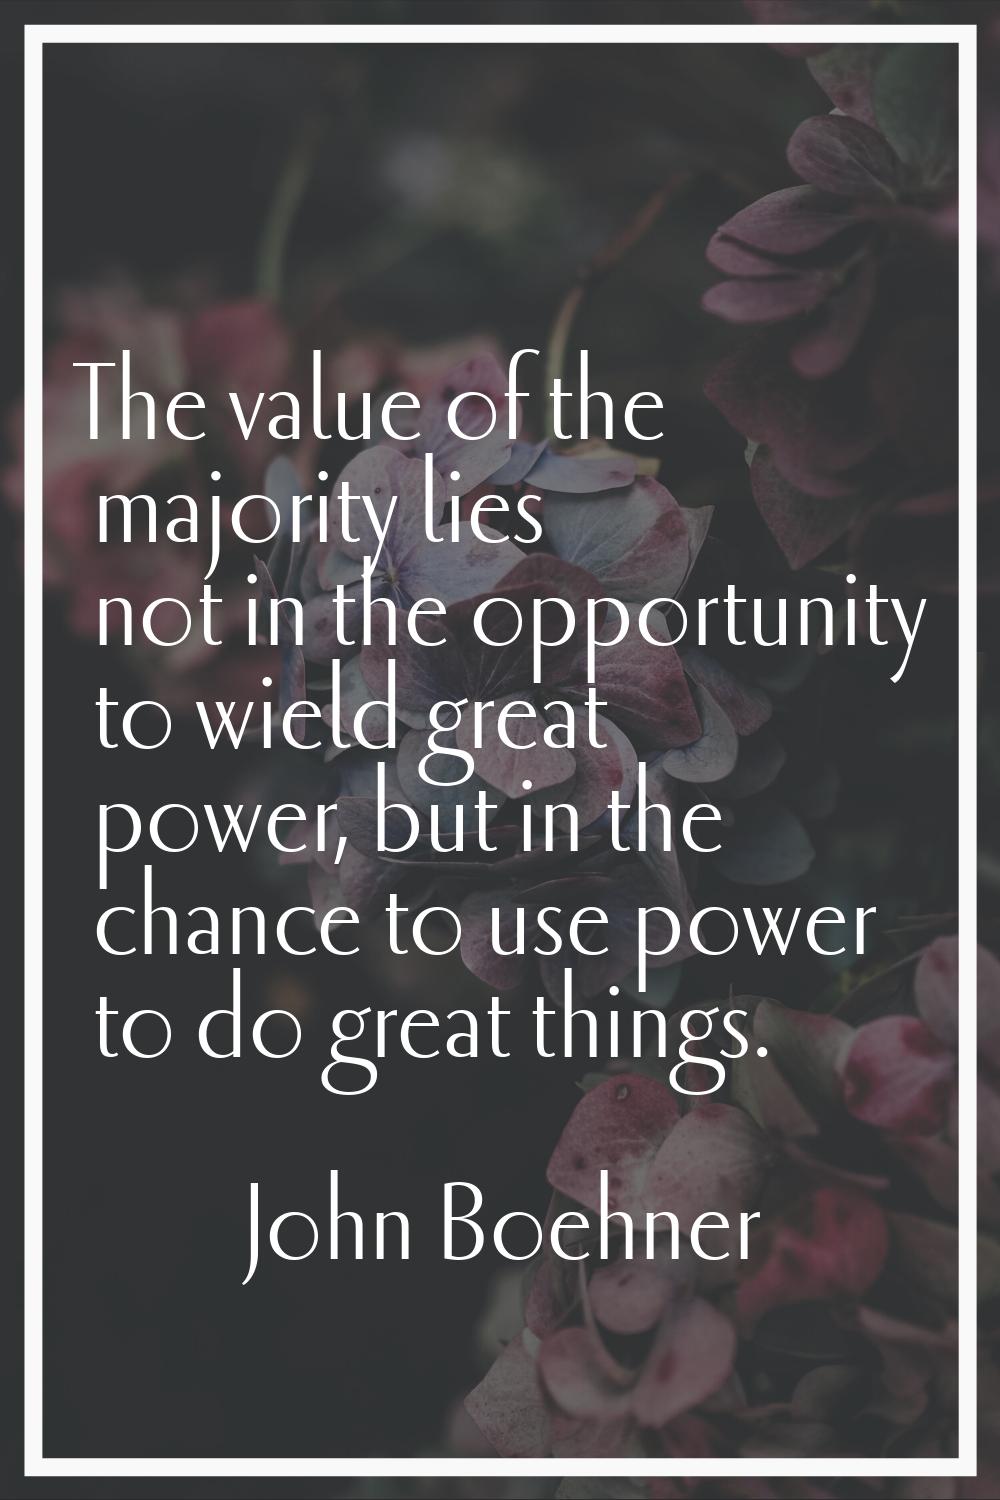 The value of the majority lies not in the opportunity to wield great power, but in the chance to us